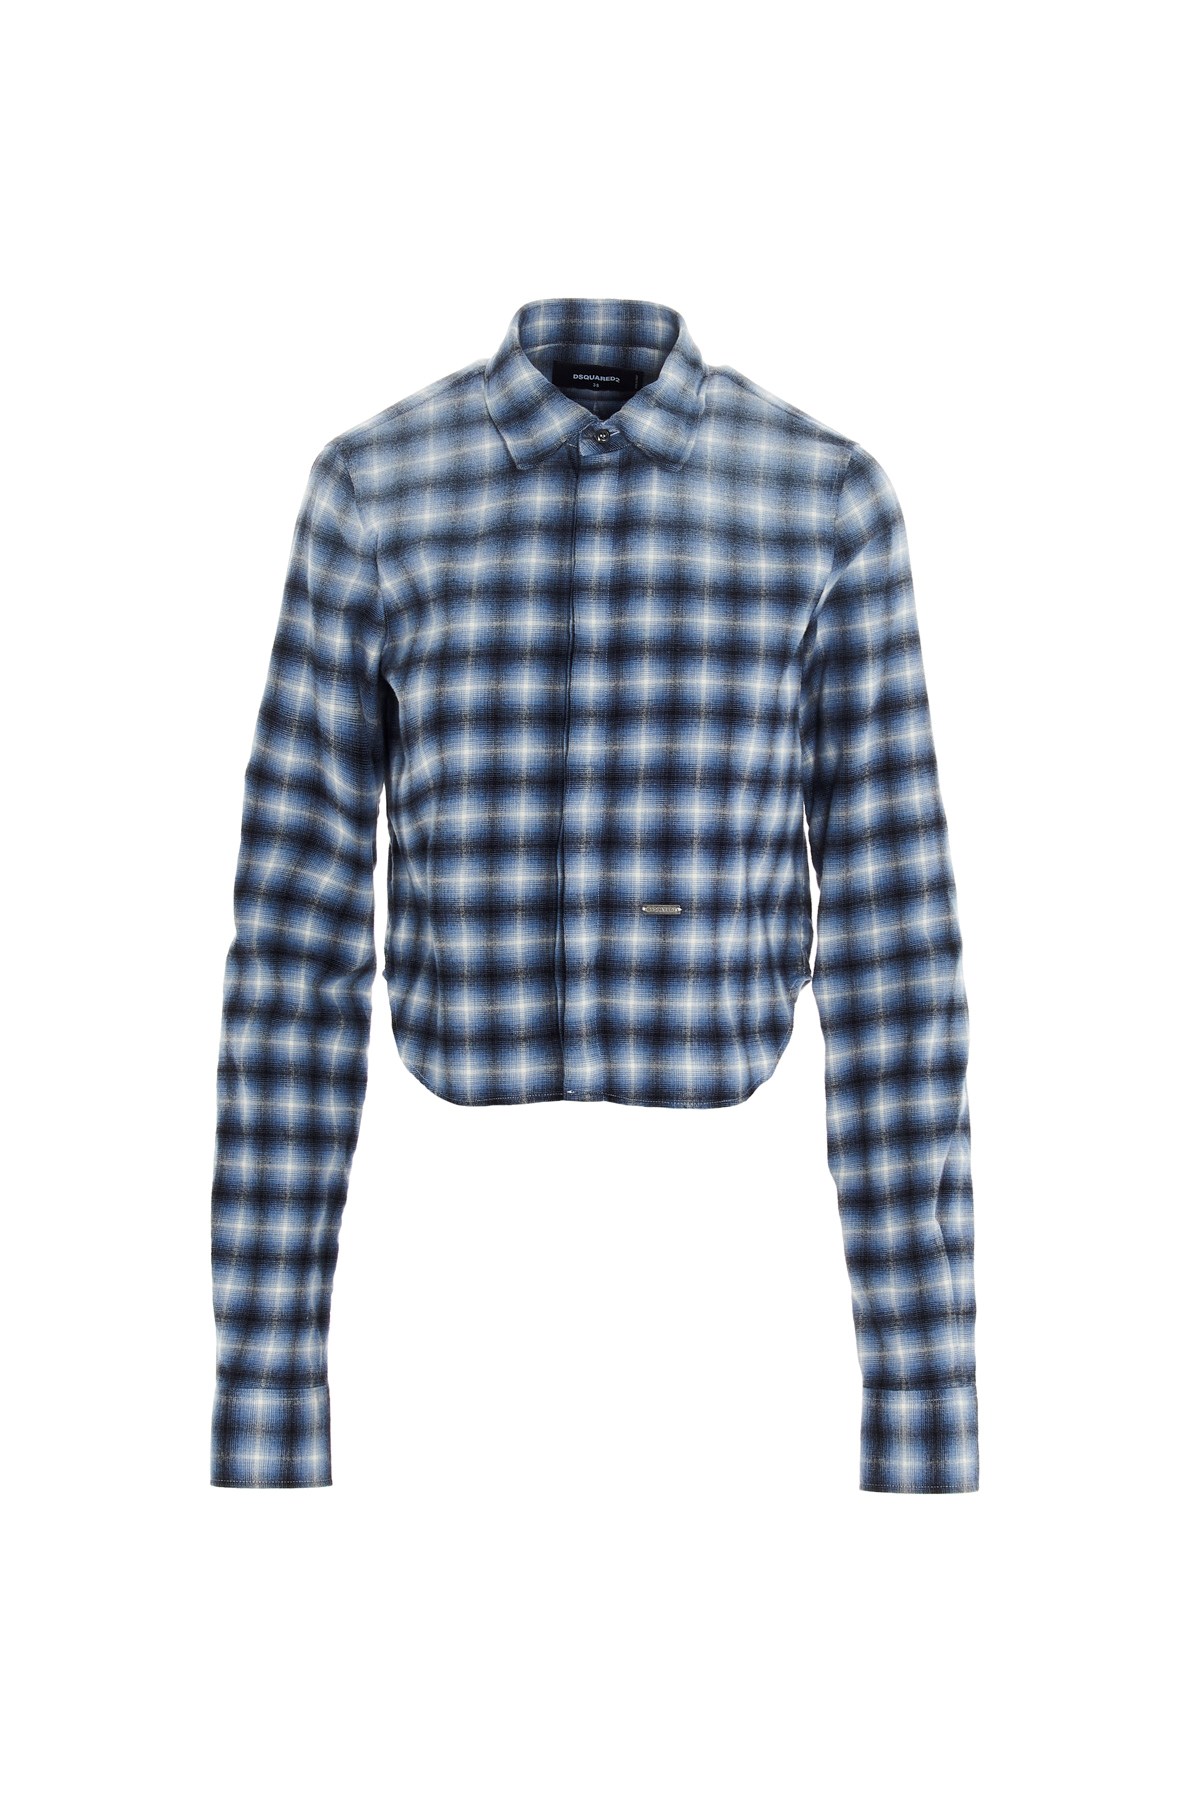 DSQUARED2 All Over Check Flannel Shirt